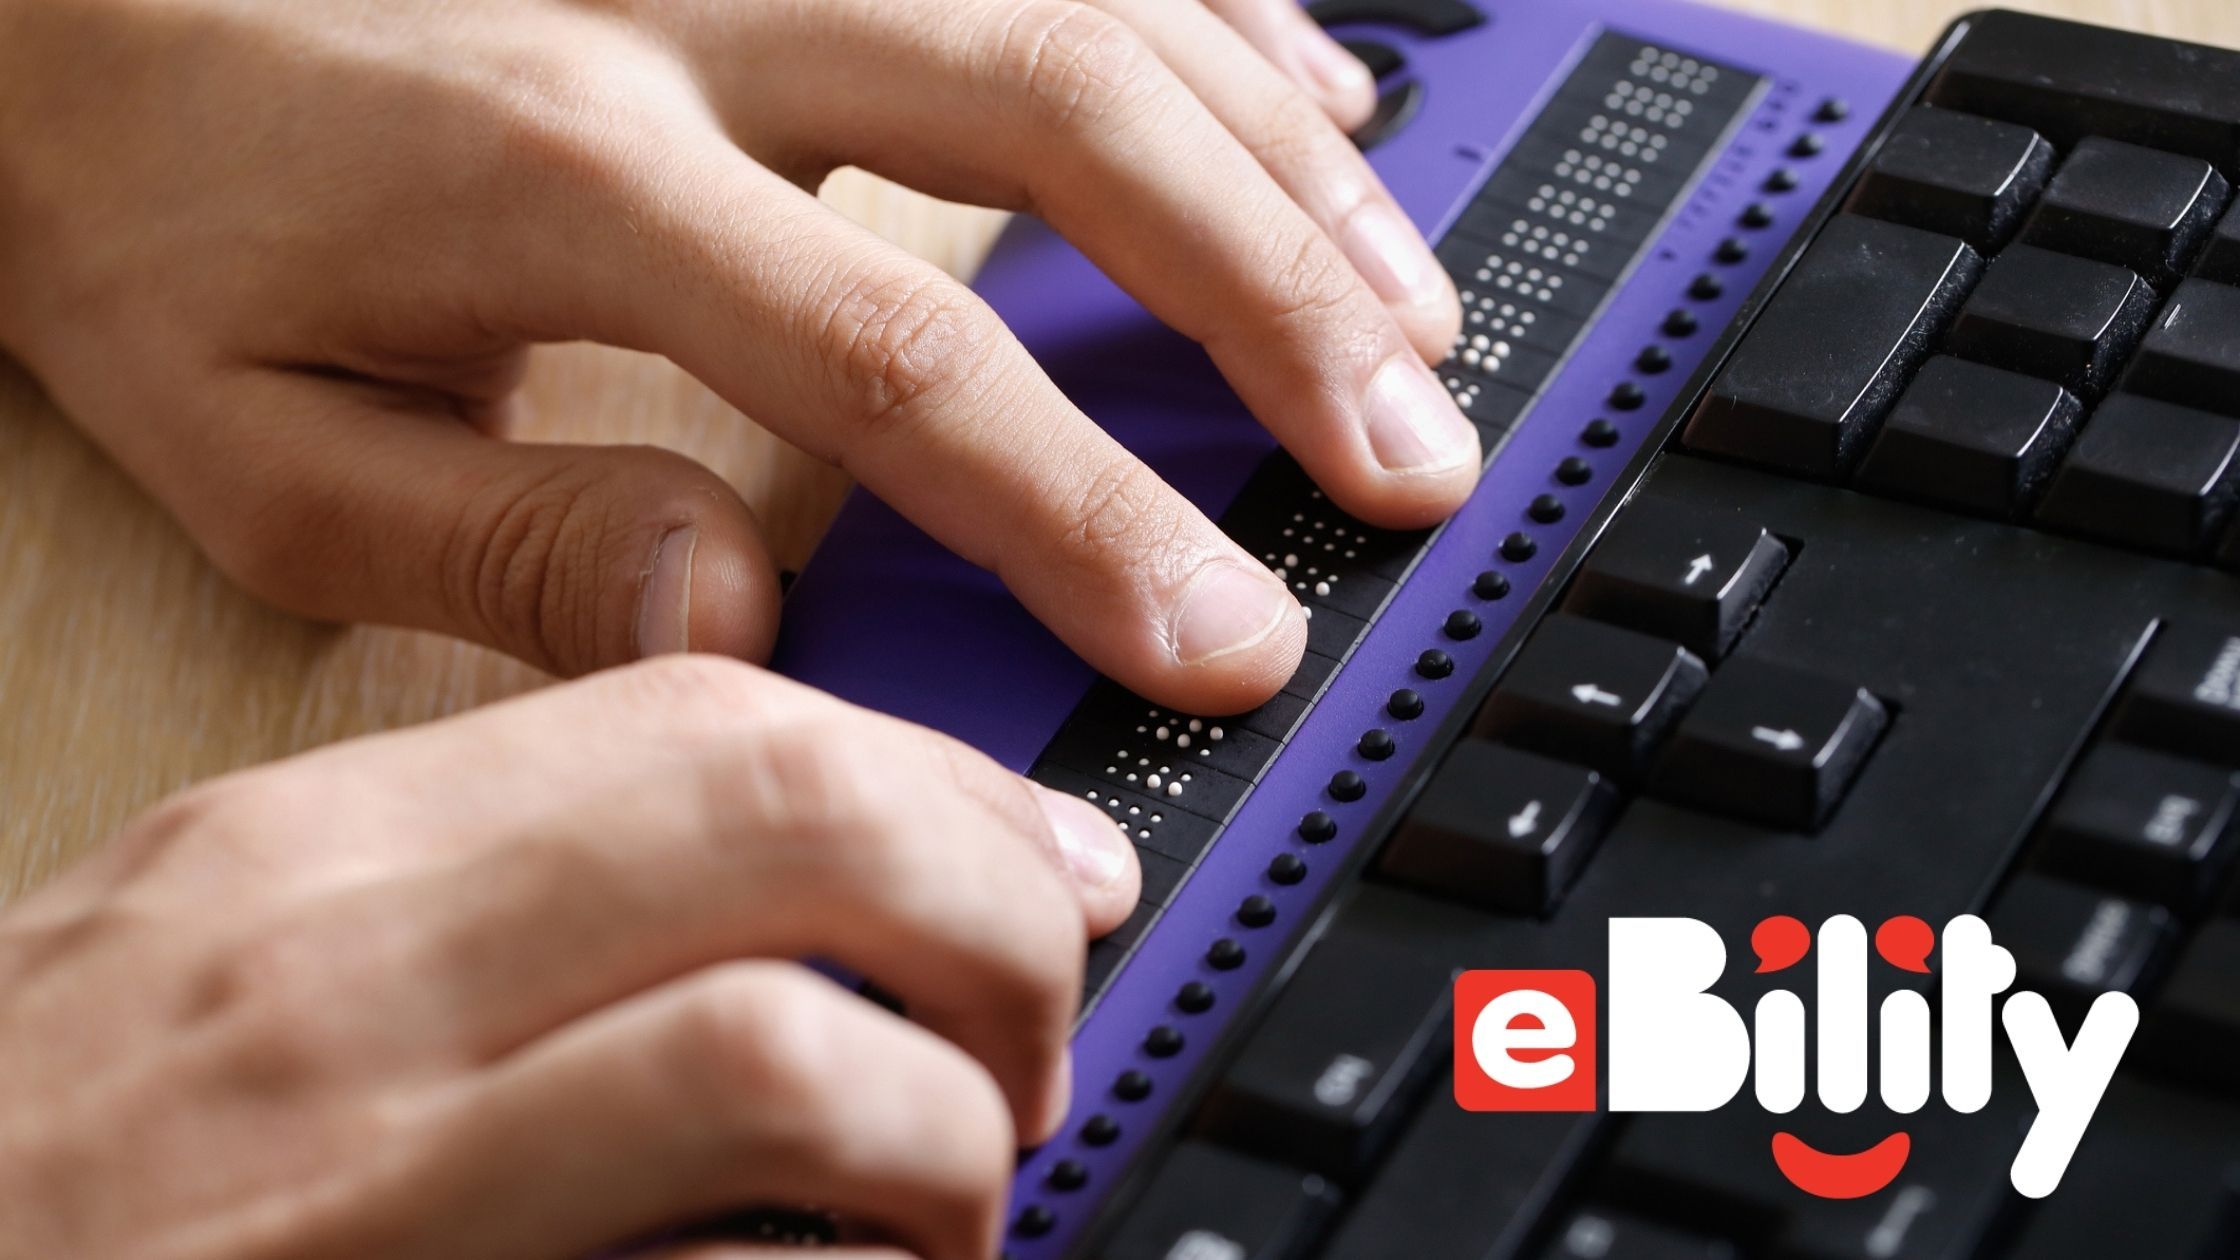 hands typing on a braille keyboard. eBility.